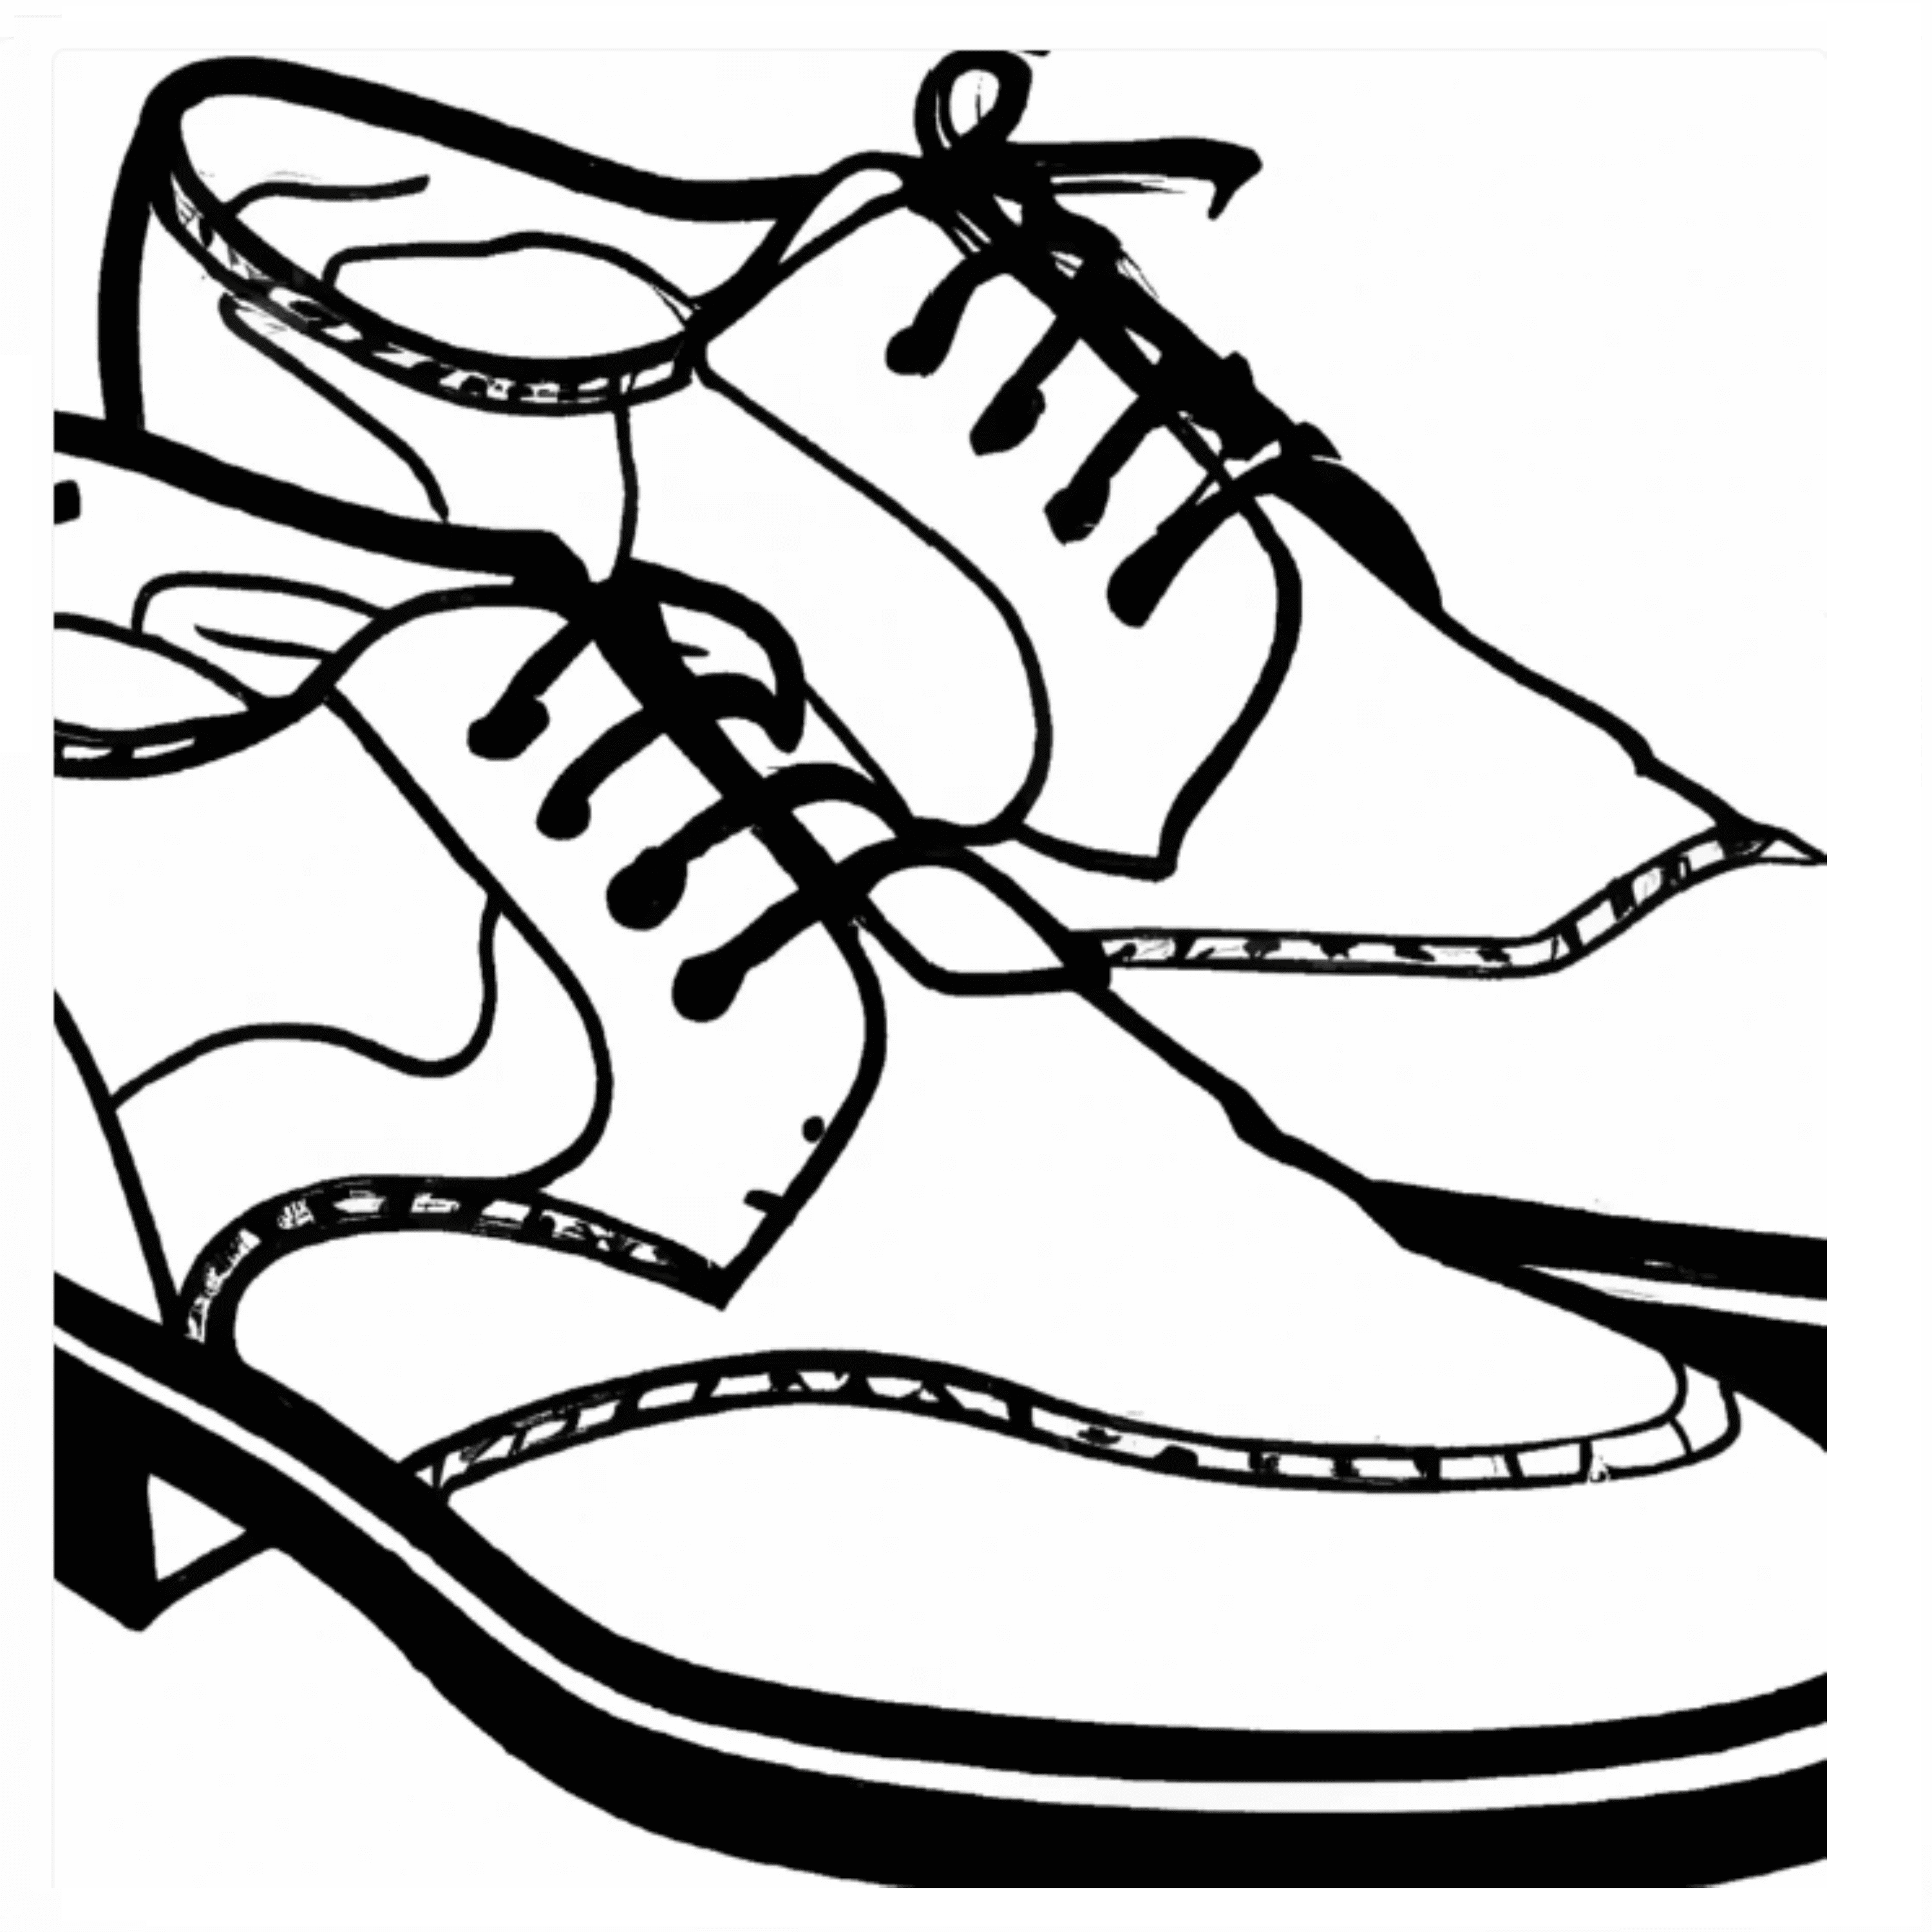 Line drawing of a pair of shoes